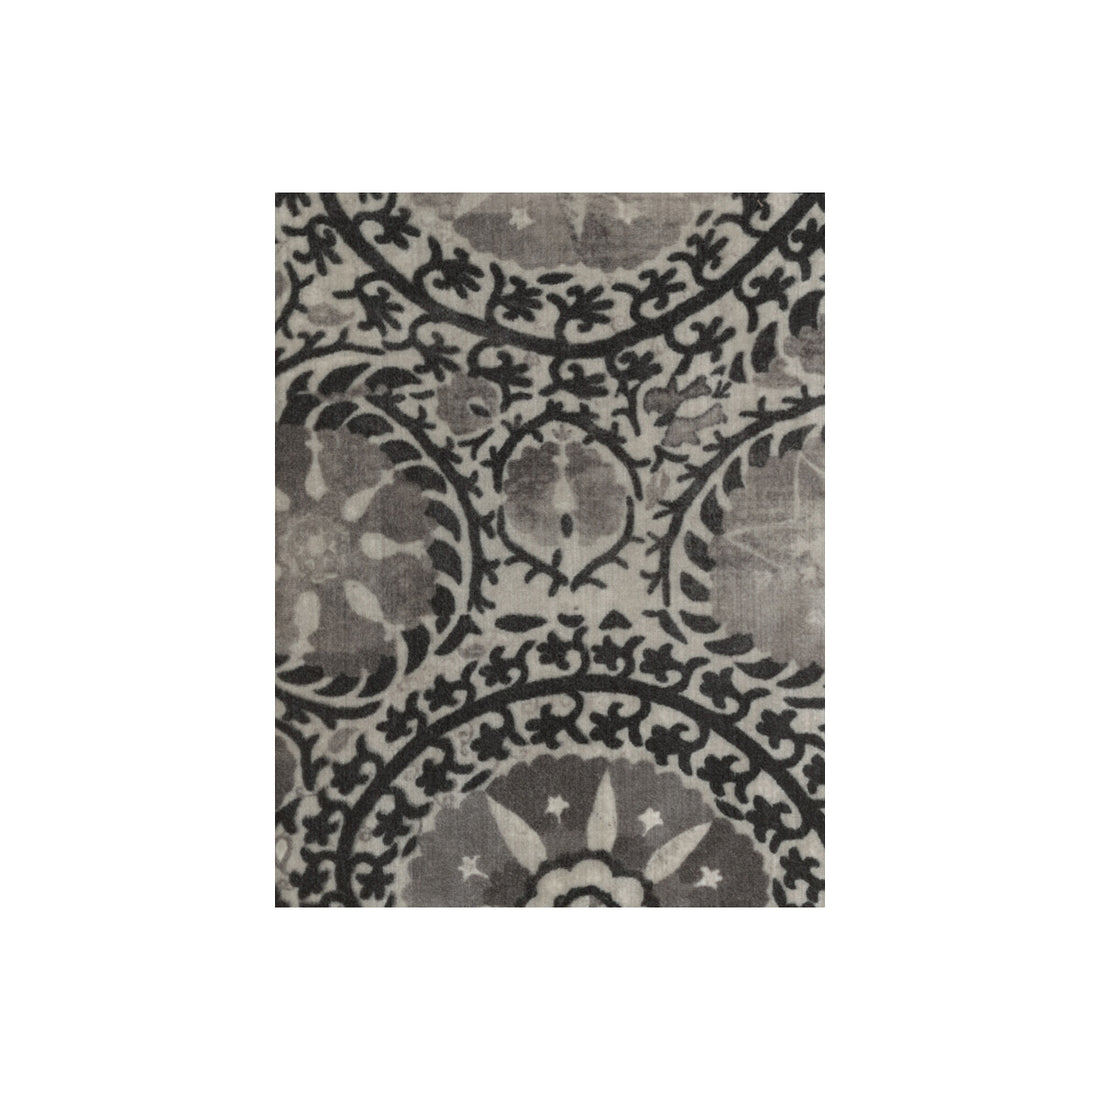 Iznik fabric in charcoal color - pattern AM100050.21.0 - by Kravet Couture in the Andrew Martin Clarendon collection